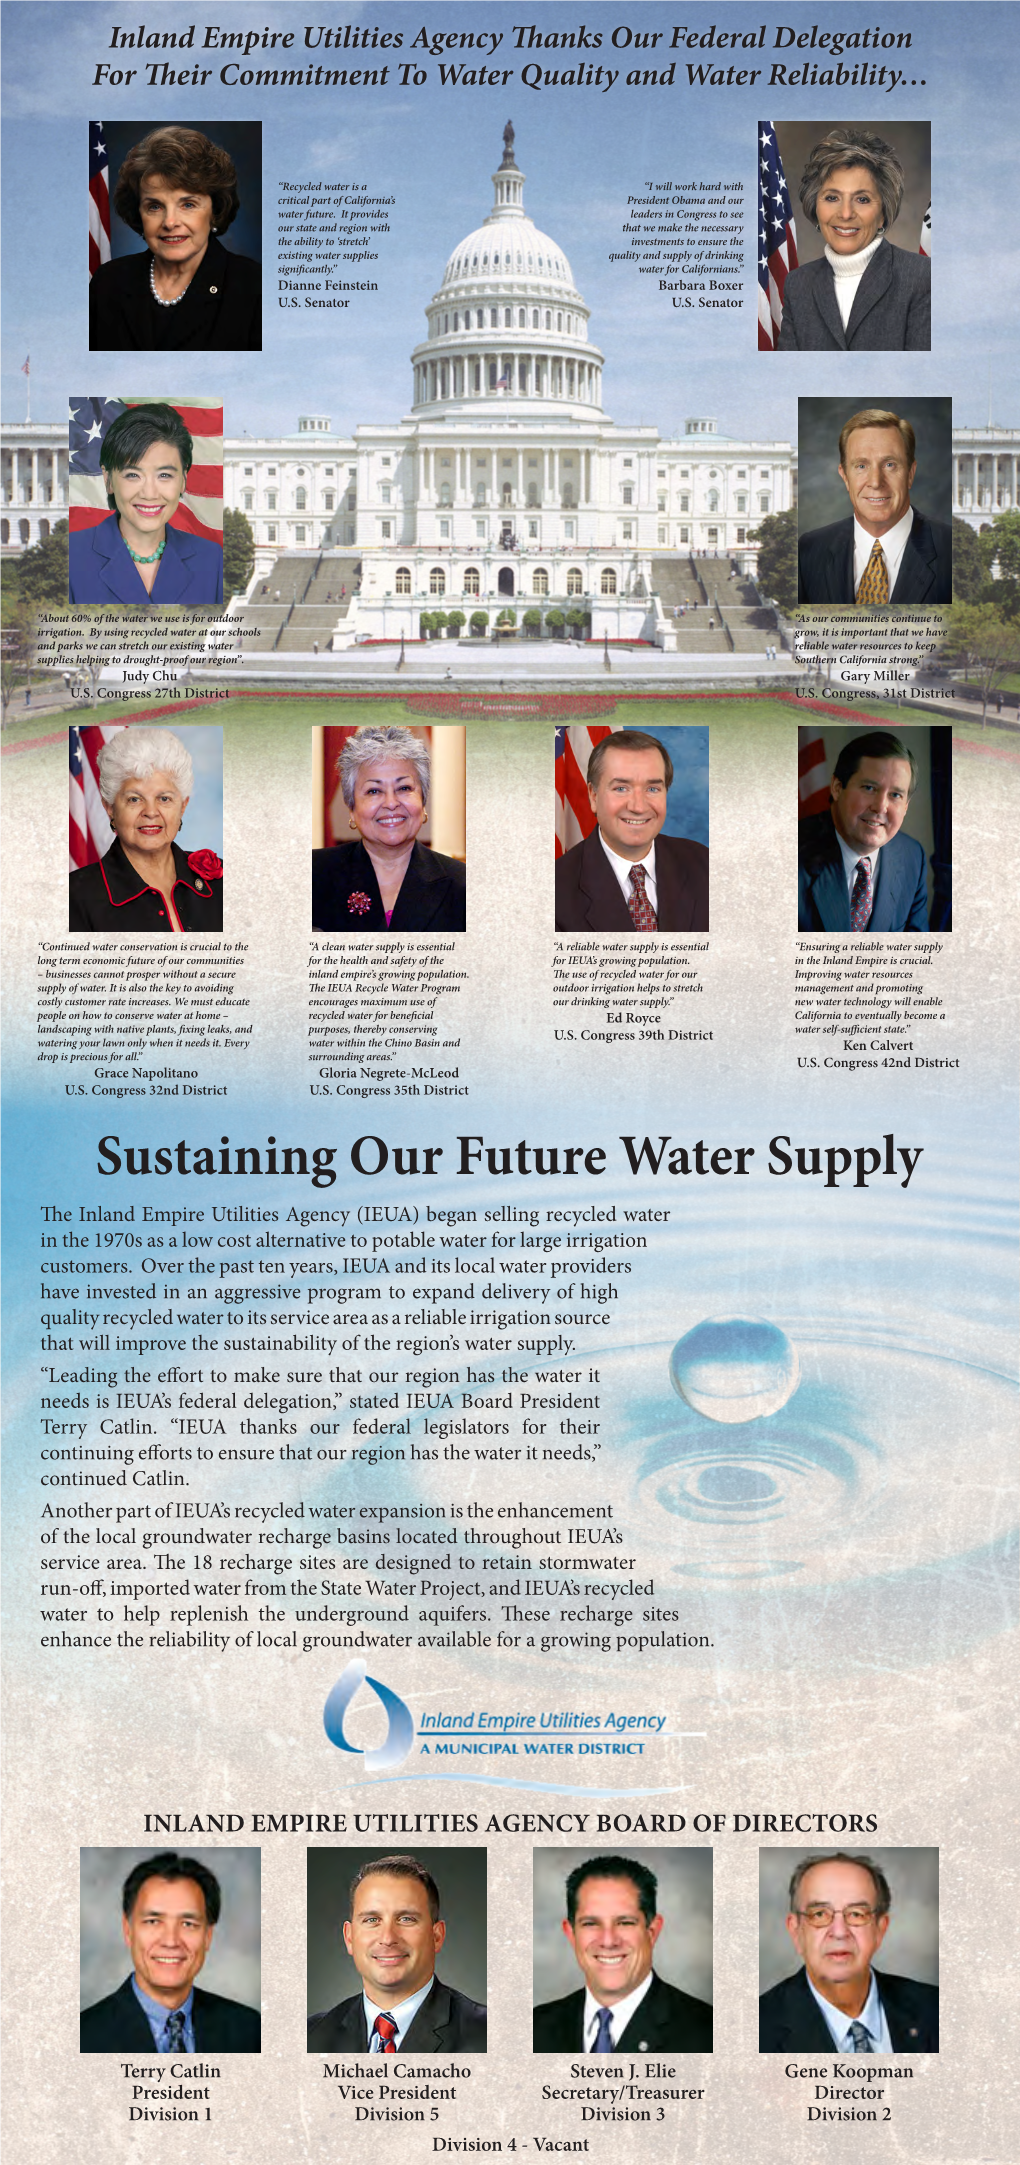 Inland Empire Utilities Agency Thanks Our Federal Delegation for Their Commitment to Water Quality and Water Reliability…